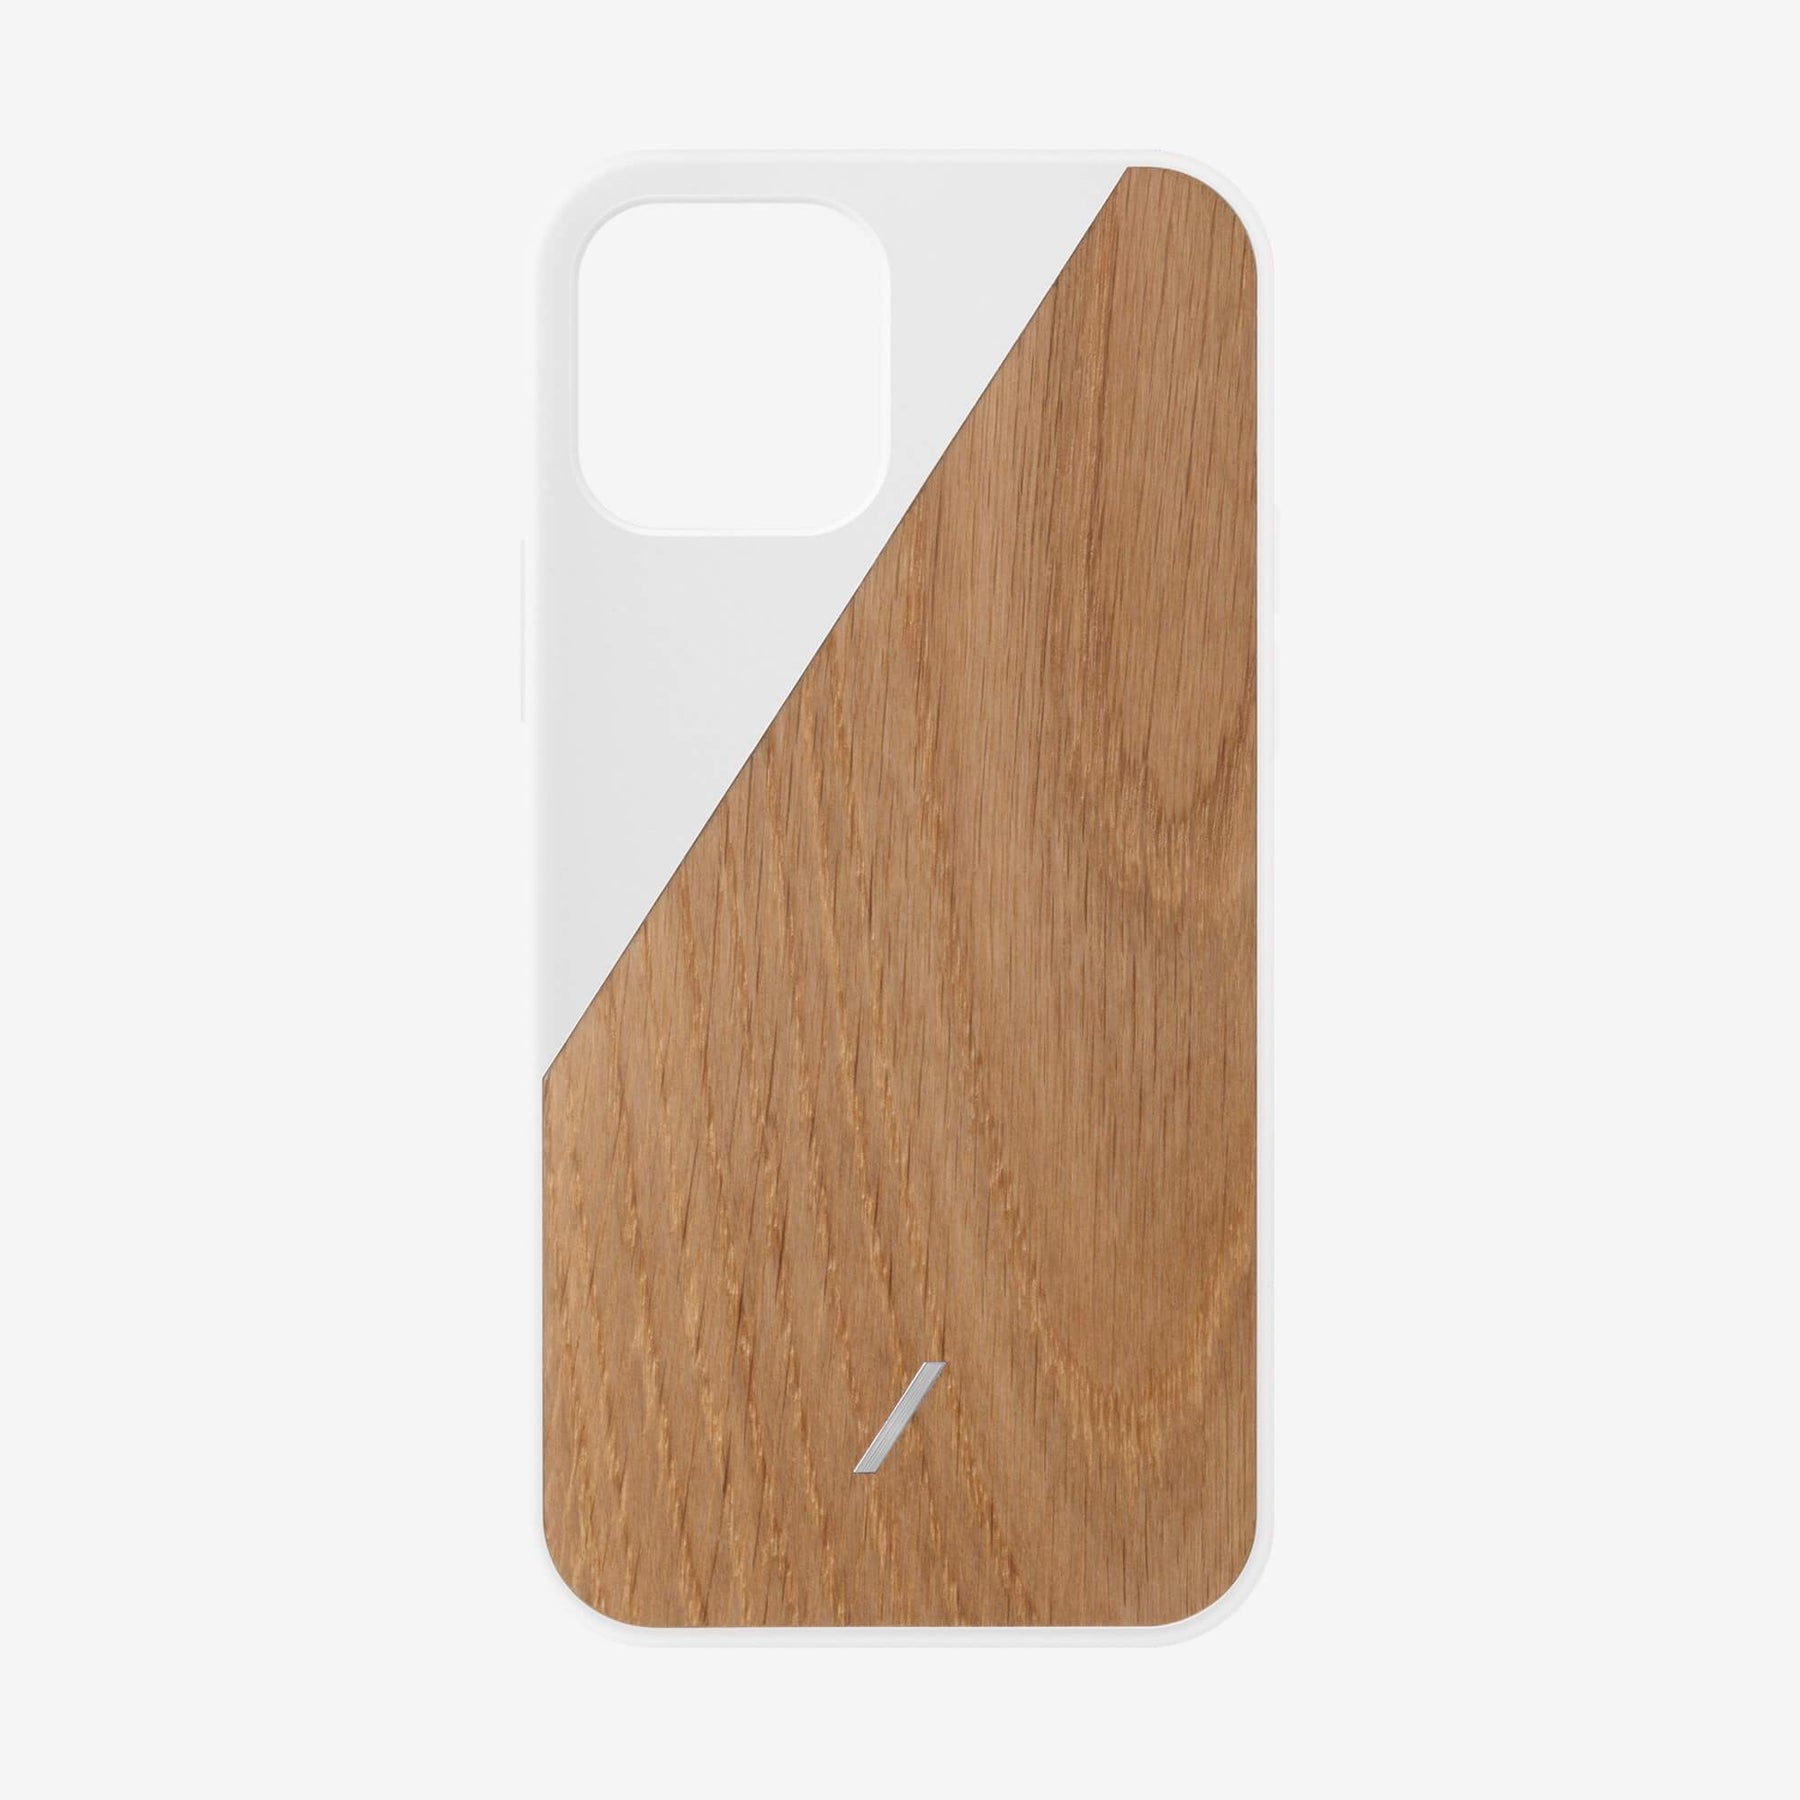 Clic Wooden (iPhone 12 Pro)